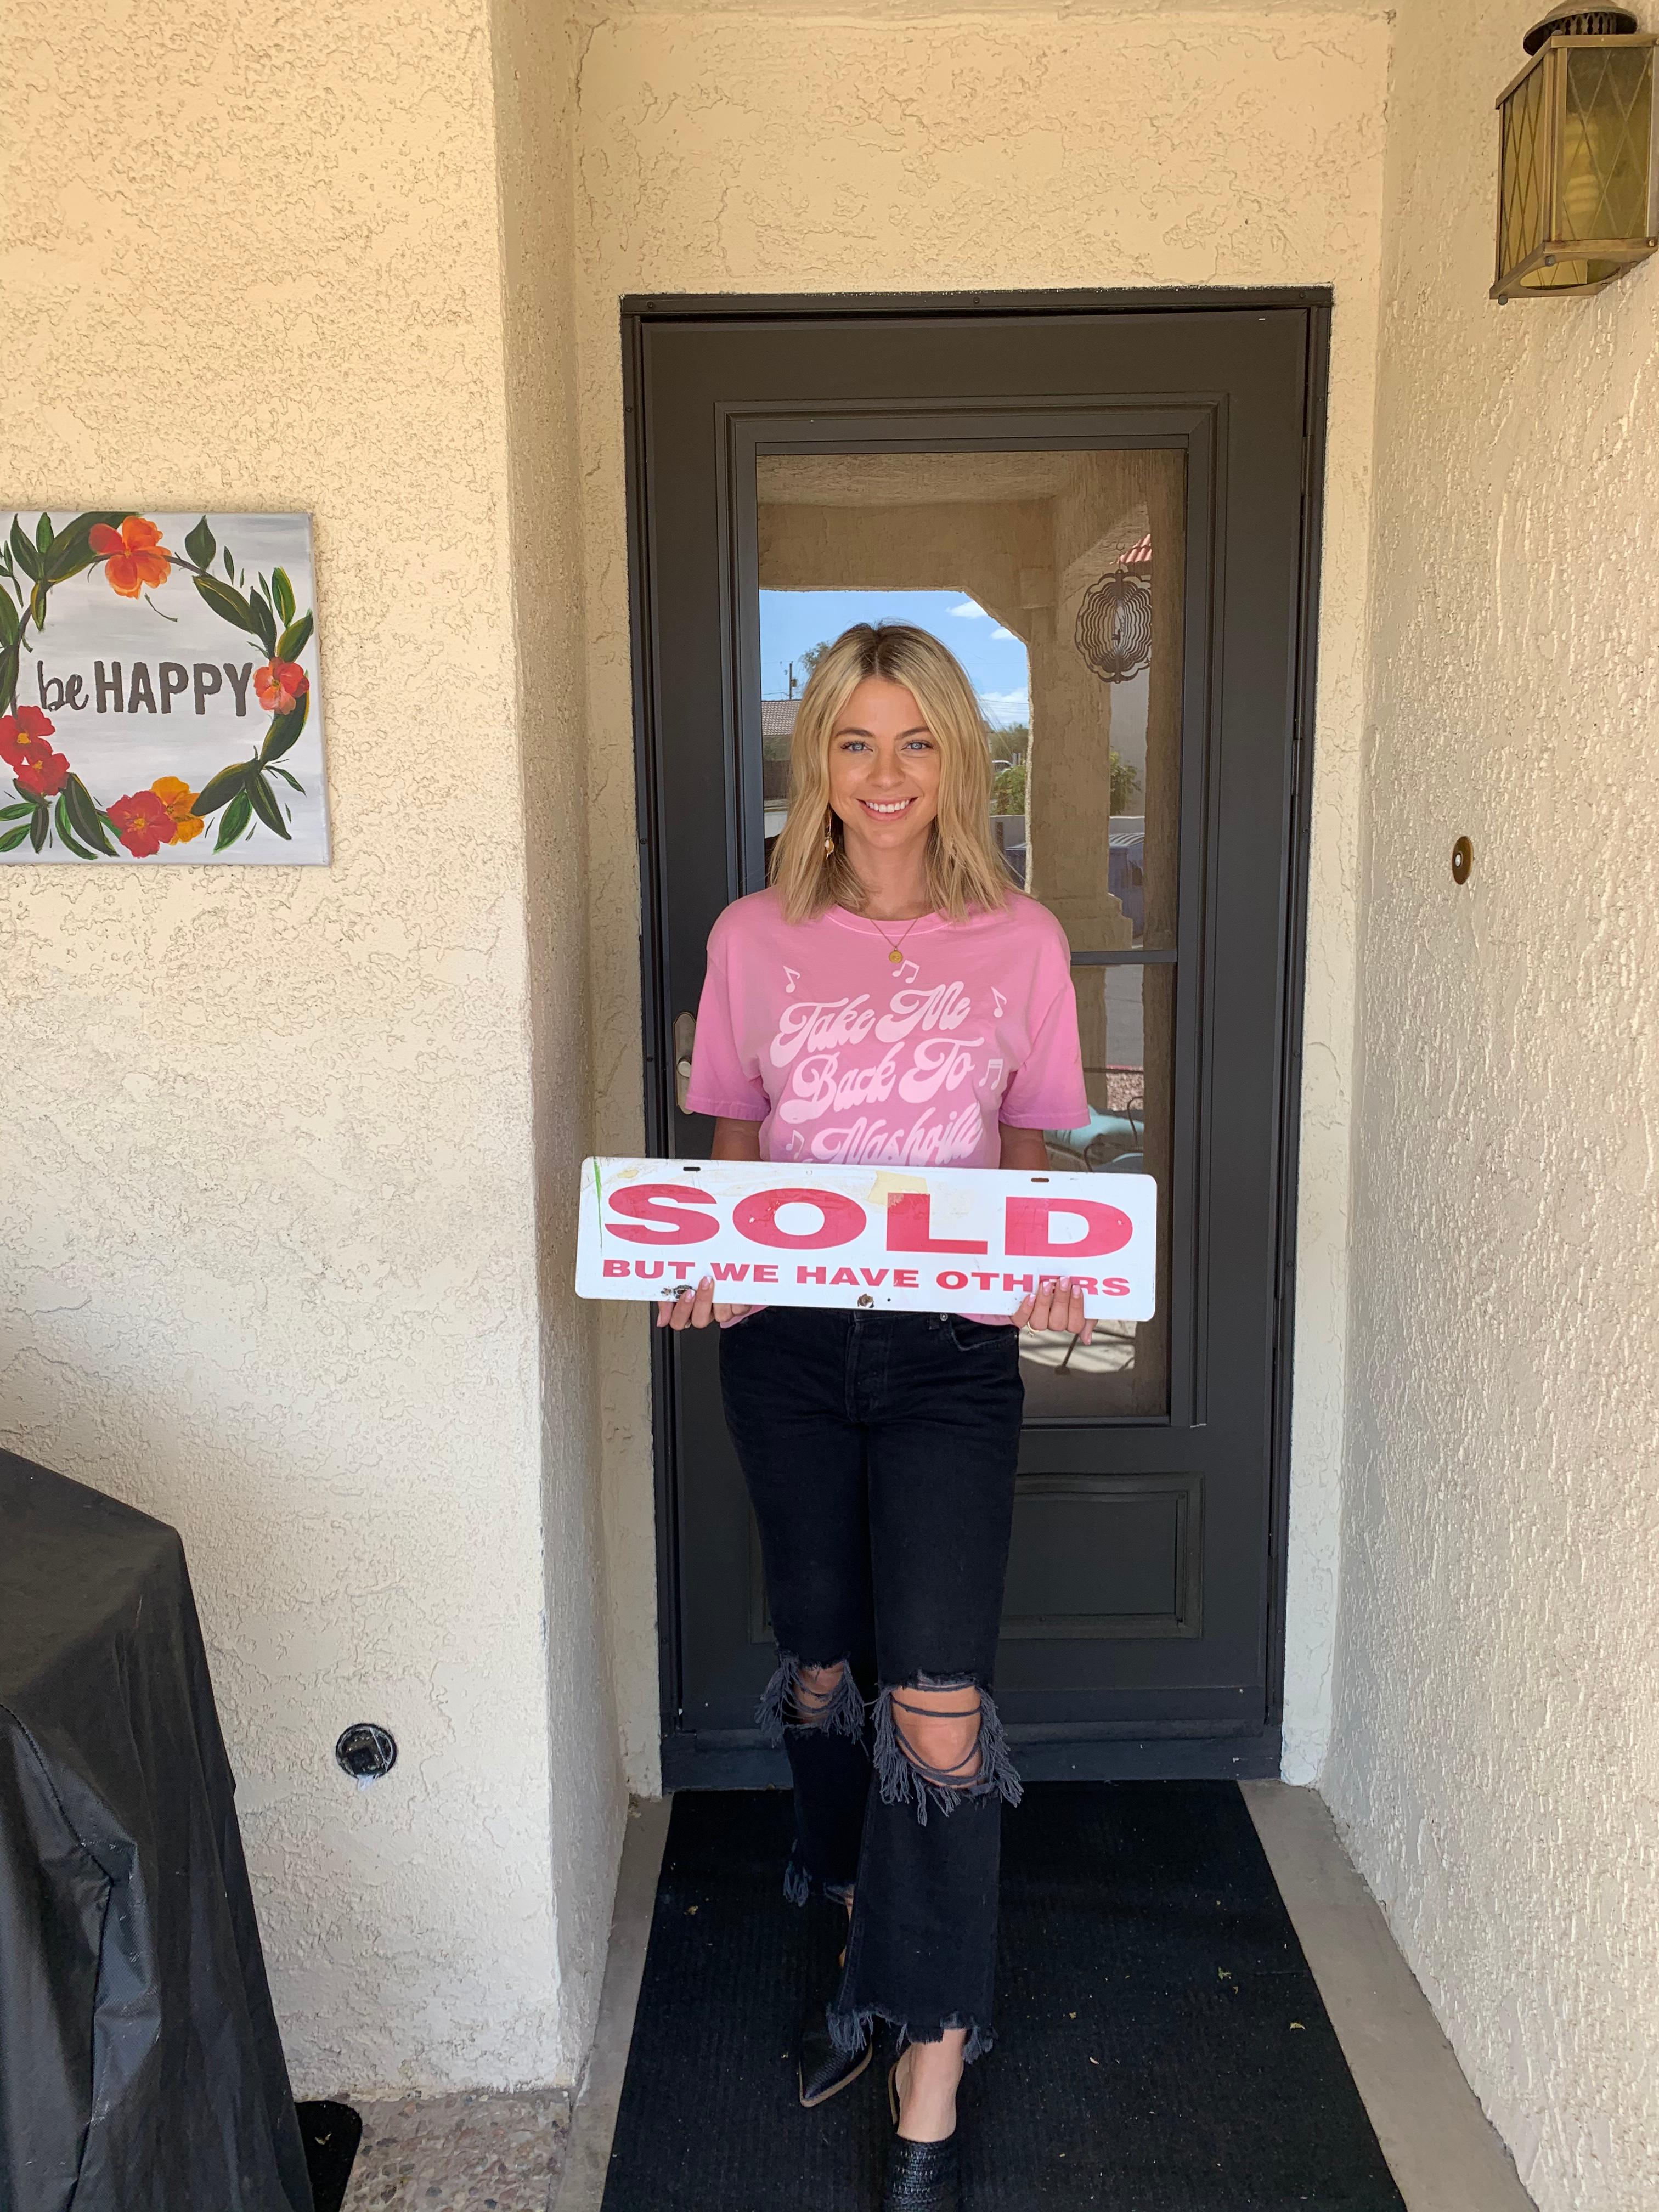 The Gedalje Group is here for you and all of your real estate needs. Whether you're looking to buy a home or sell your home, we're here for you! Contact our experienced team of realtors in Bullhead City for your buying, selling, and real estate investing needs!